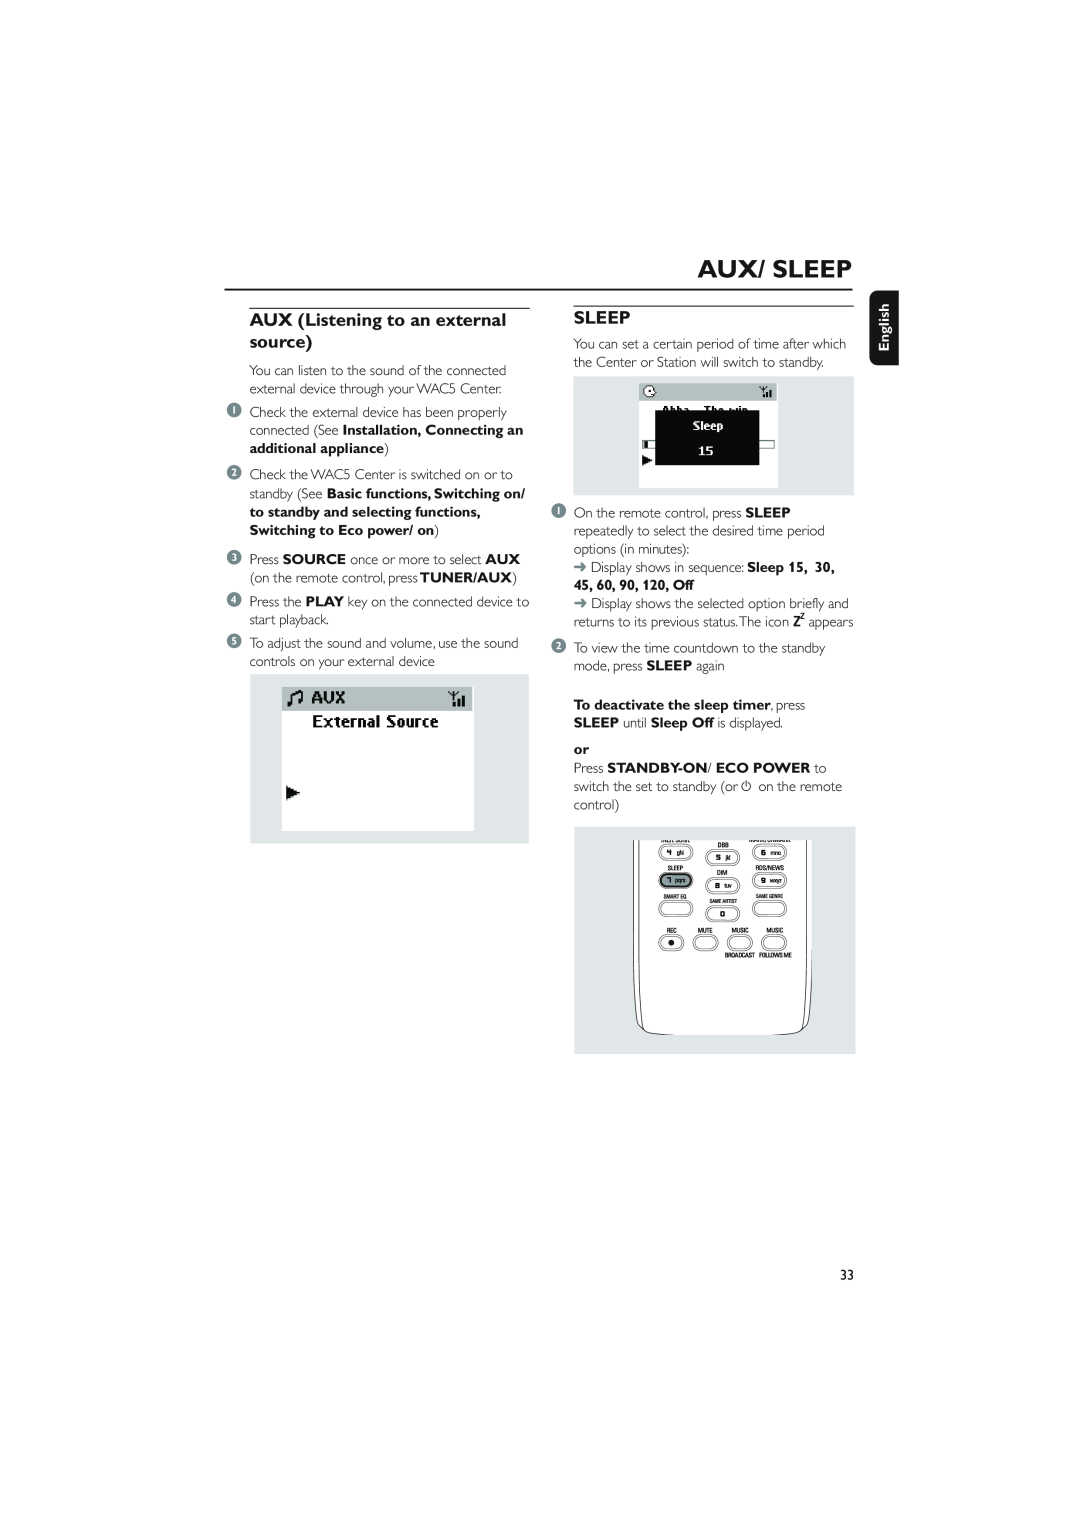 Philips WAC5 user manual Aux/ Sleep, AUX Listening to an external source, English 